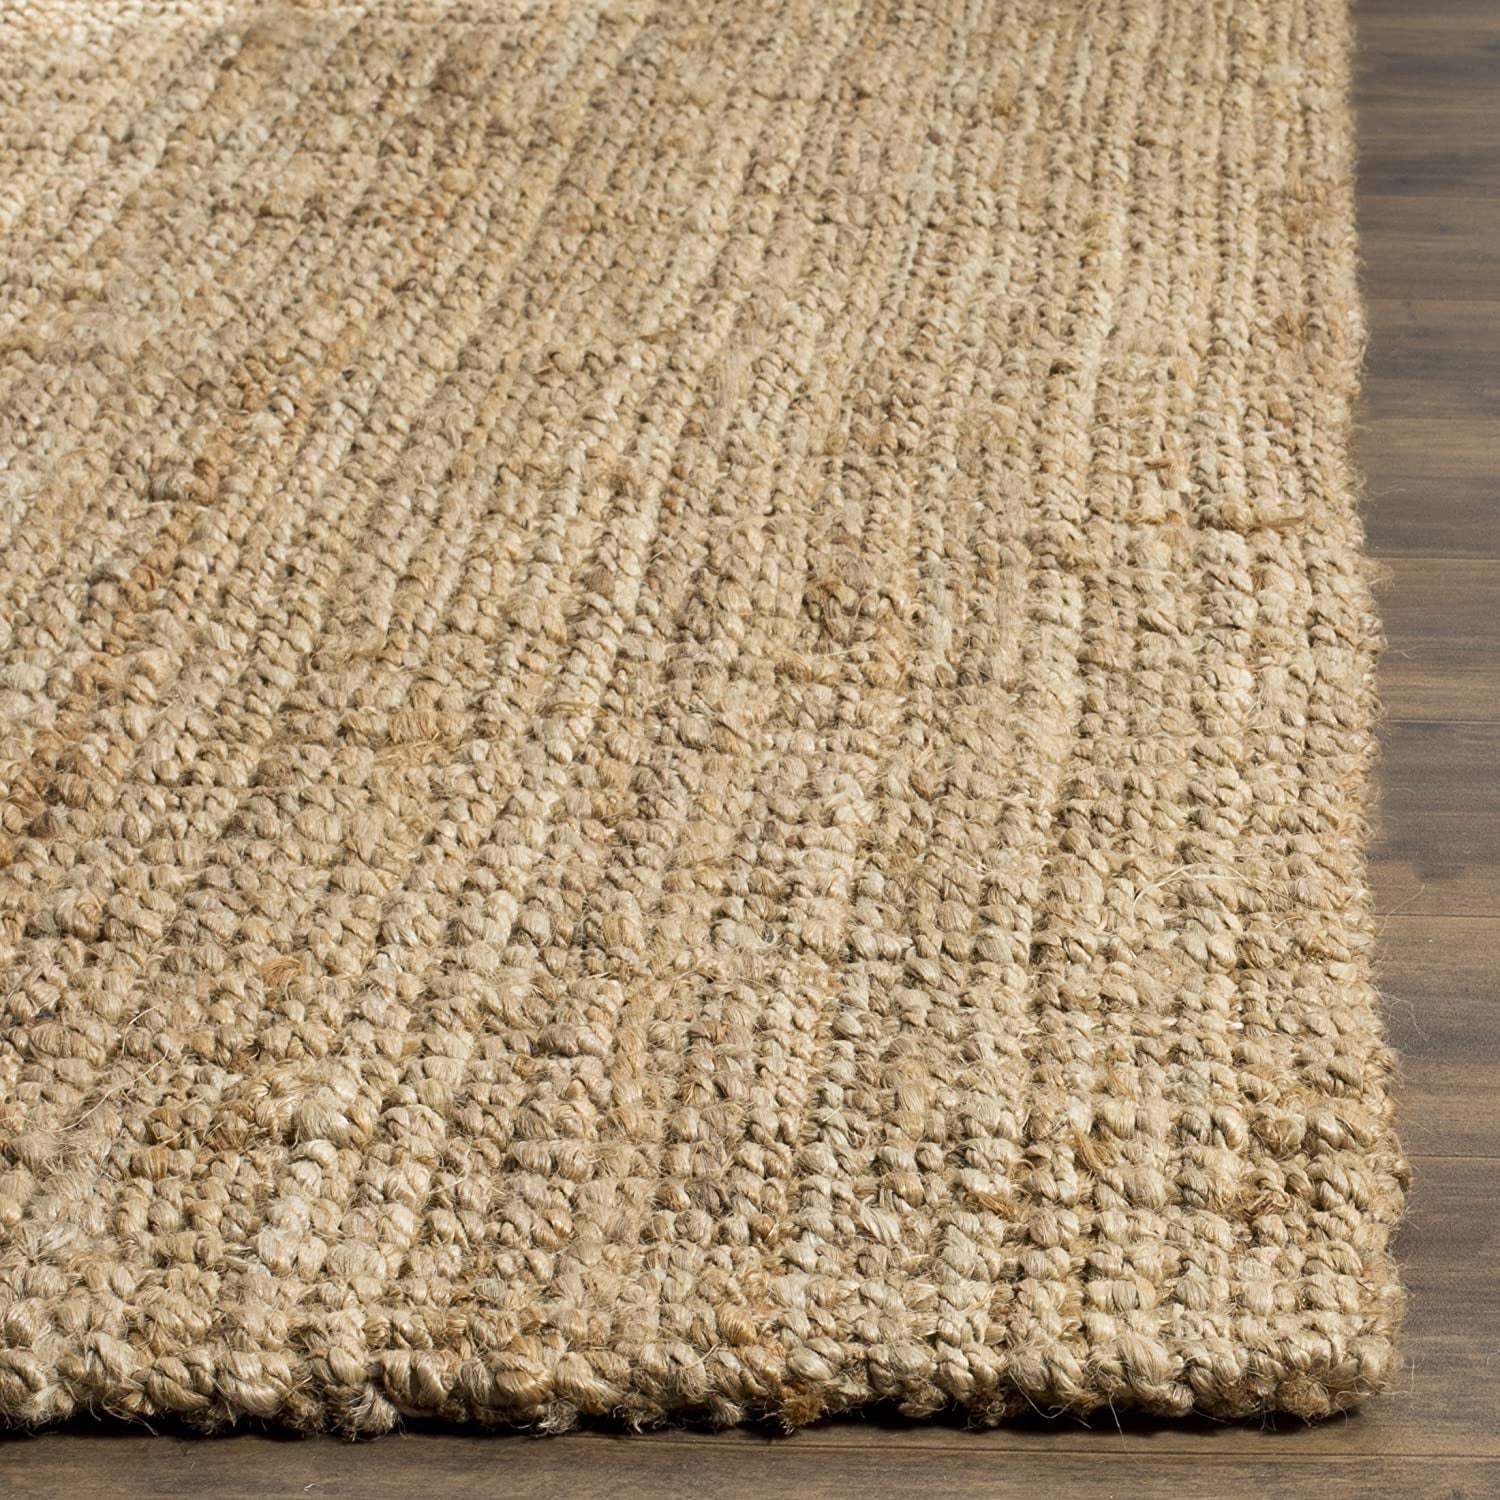 Natural Fiber Collection 9' X 12' Bleach/Ivory NF747B Handmade Contemporary Rustic Farmhouse Premium Jute Living Room Dining Bedroom Area Rug